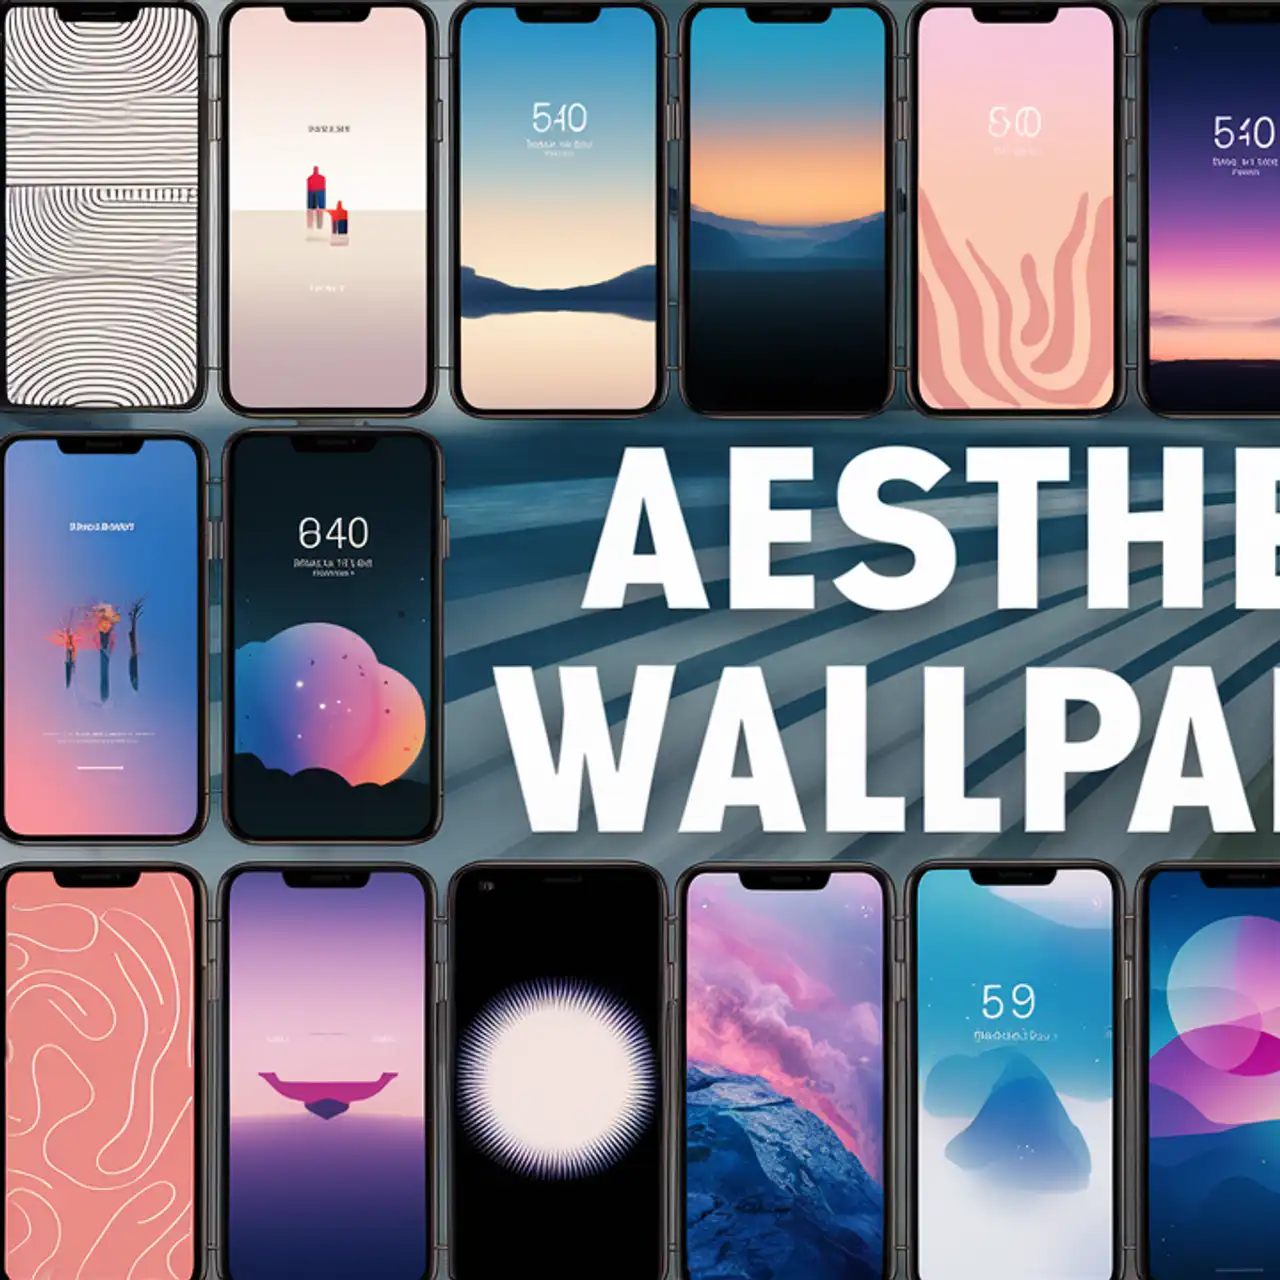 40+ Aesthetic iPhone Wallpapers for a Stunning Screen